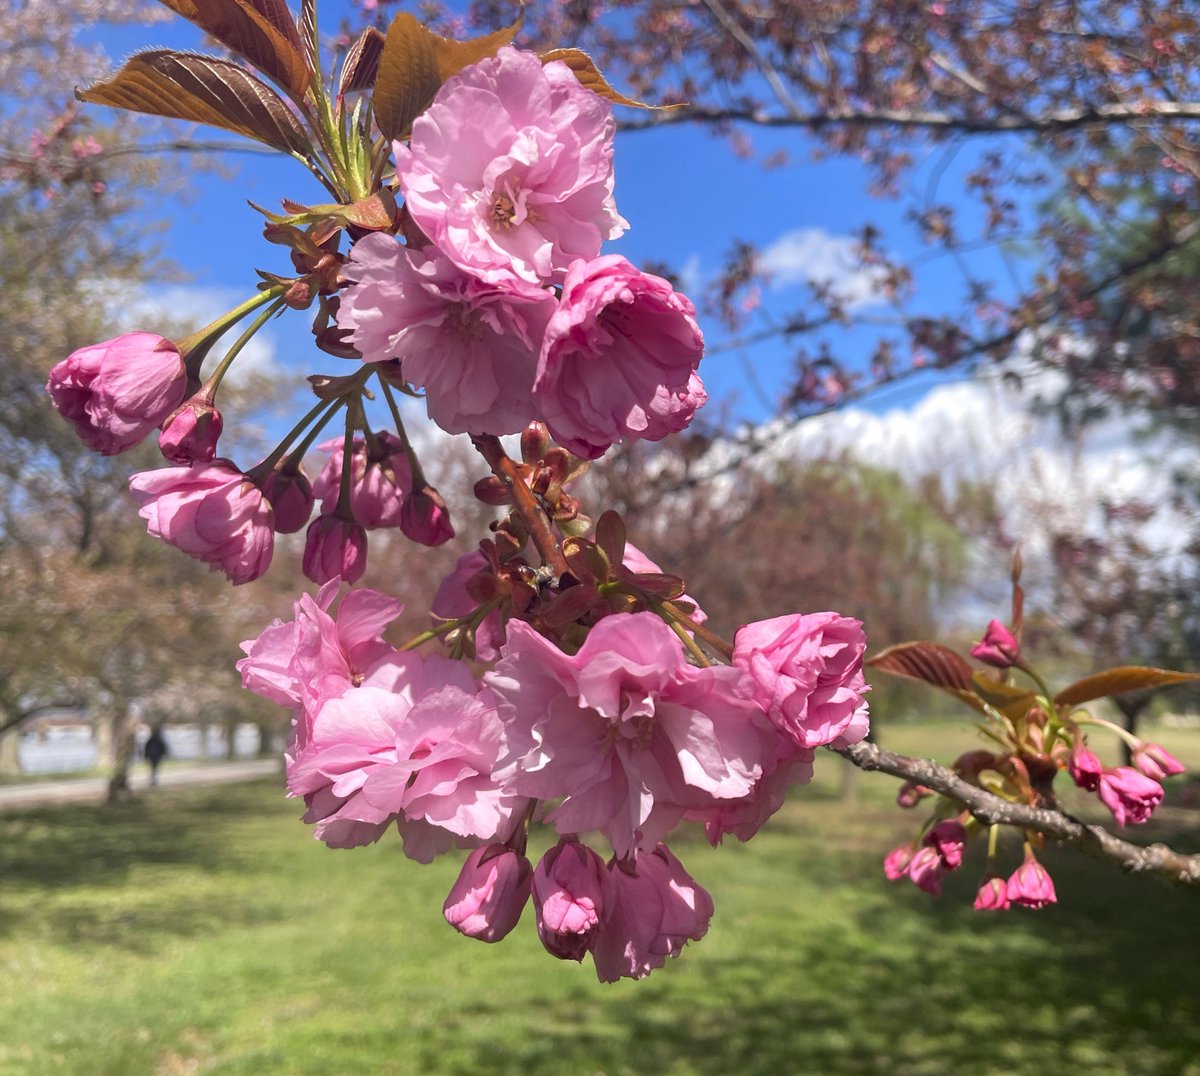 This year's #cherryblossom story isn't quite over. The Kwanzan variety of cherry trees are coming into bloom now. Dozens of these gorgeous trees planted together on the Potomac side of the Hains Point loop will offer a breathtaking bright pink display over the next week. 🌸🌸🌸